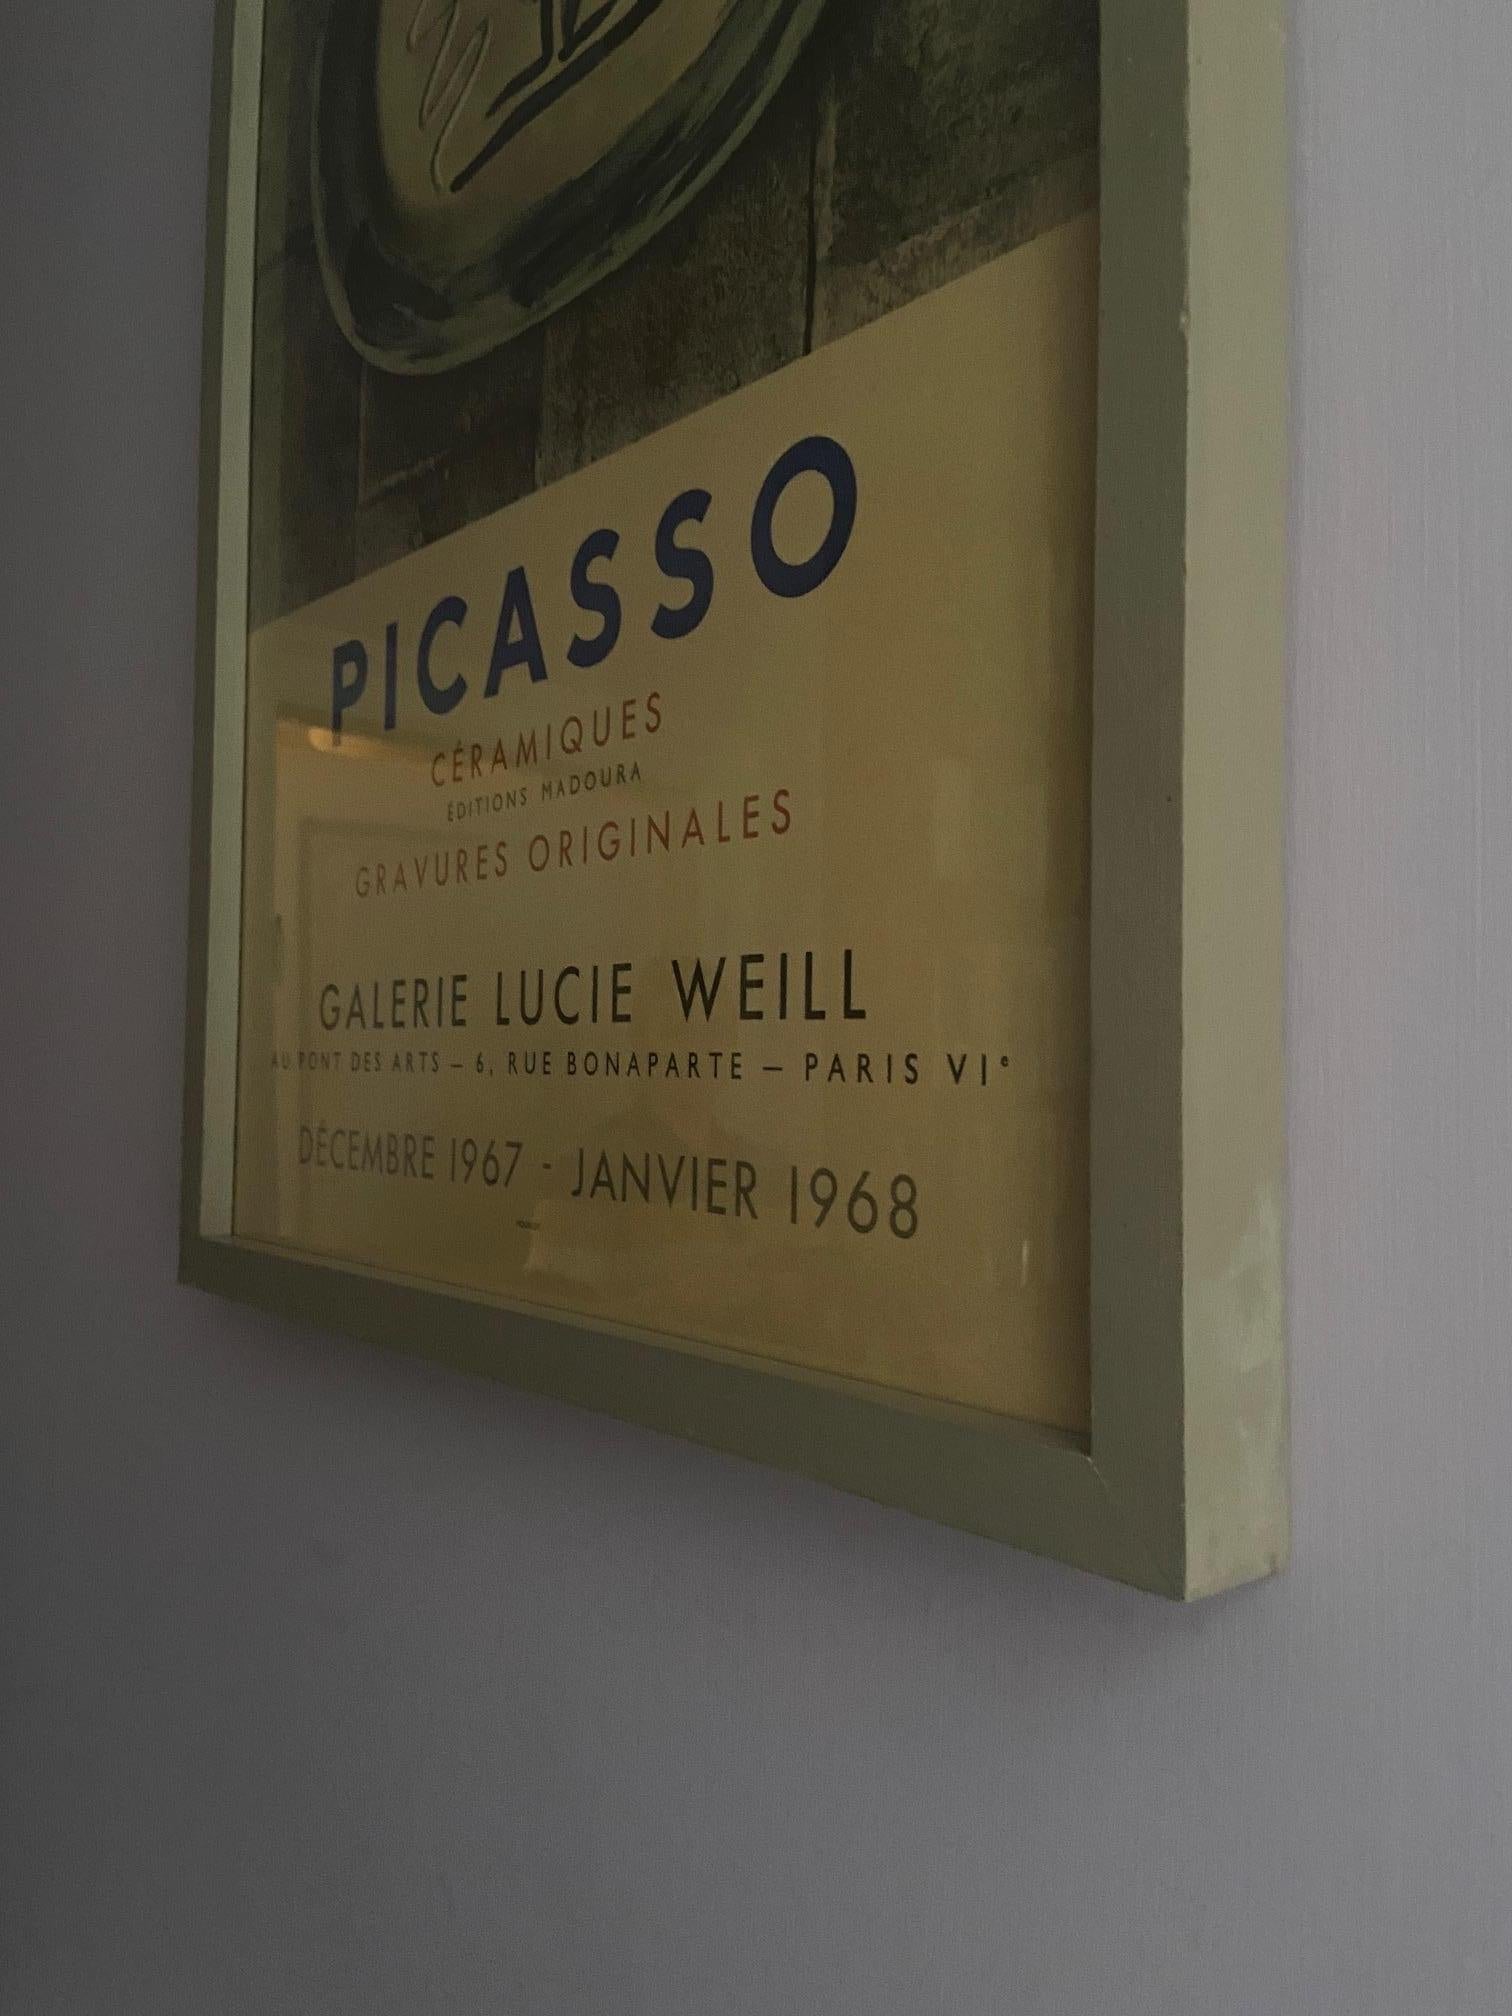 French Vintage Poster Pablo Picasso “Picasso Ceramics” Galleri Lucie Weill, France 1976